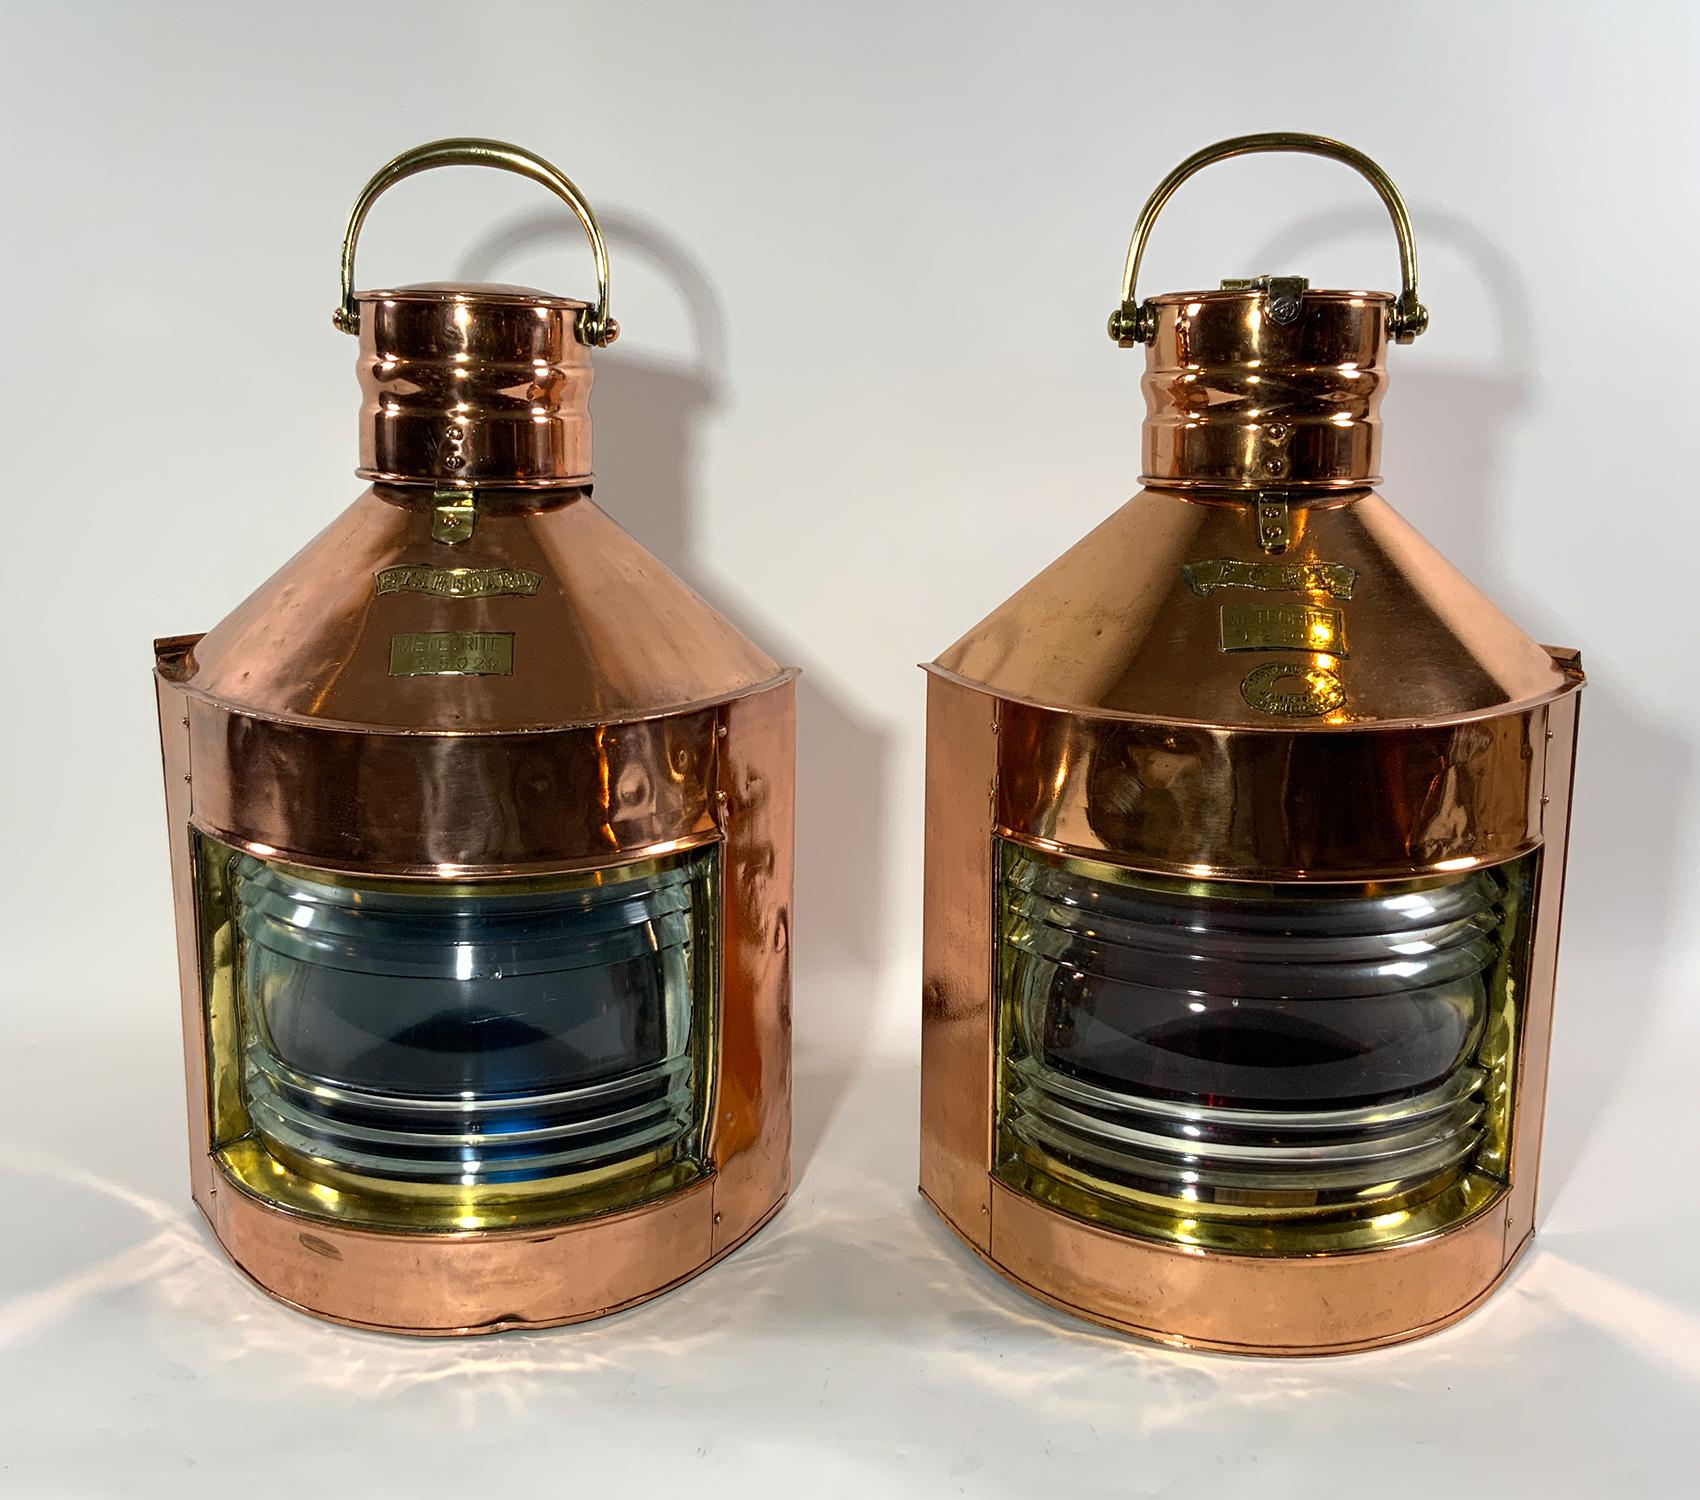 Sturdy ships port and starboard ships lanterns with Fresnel glass lenses. With brass badges from English maker 